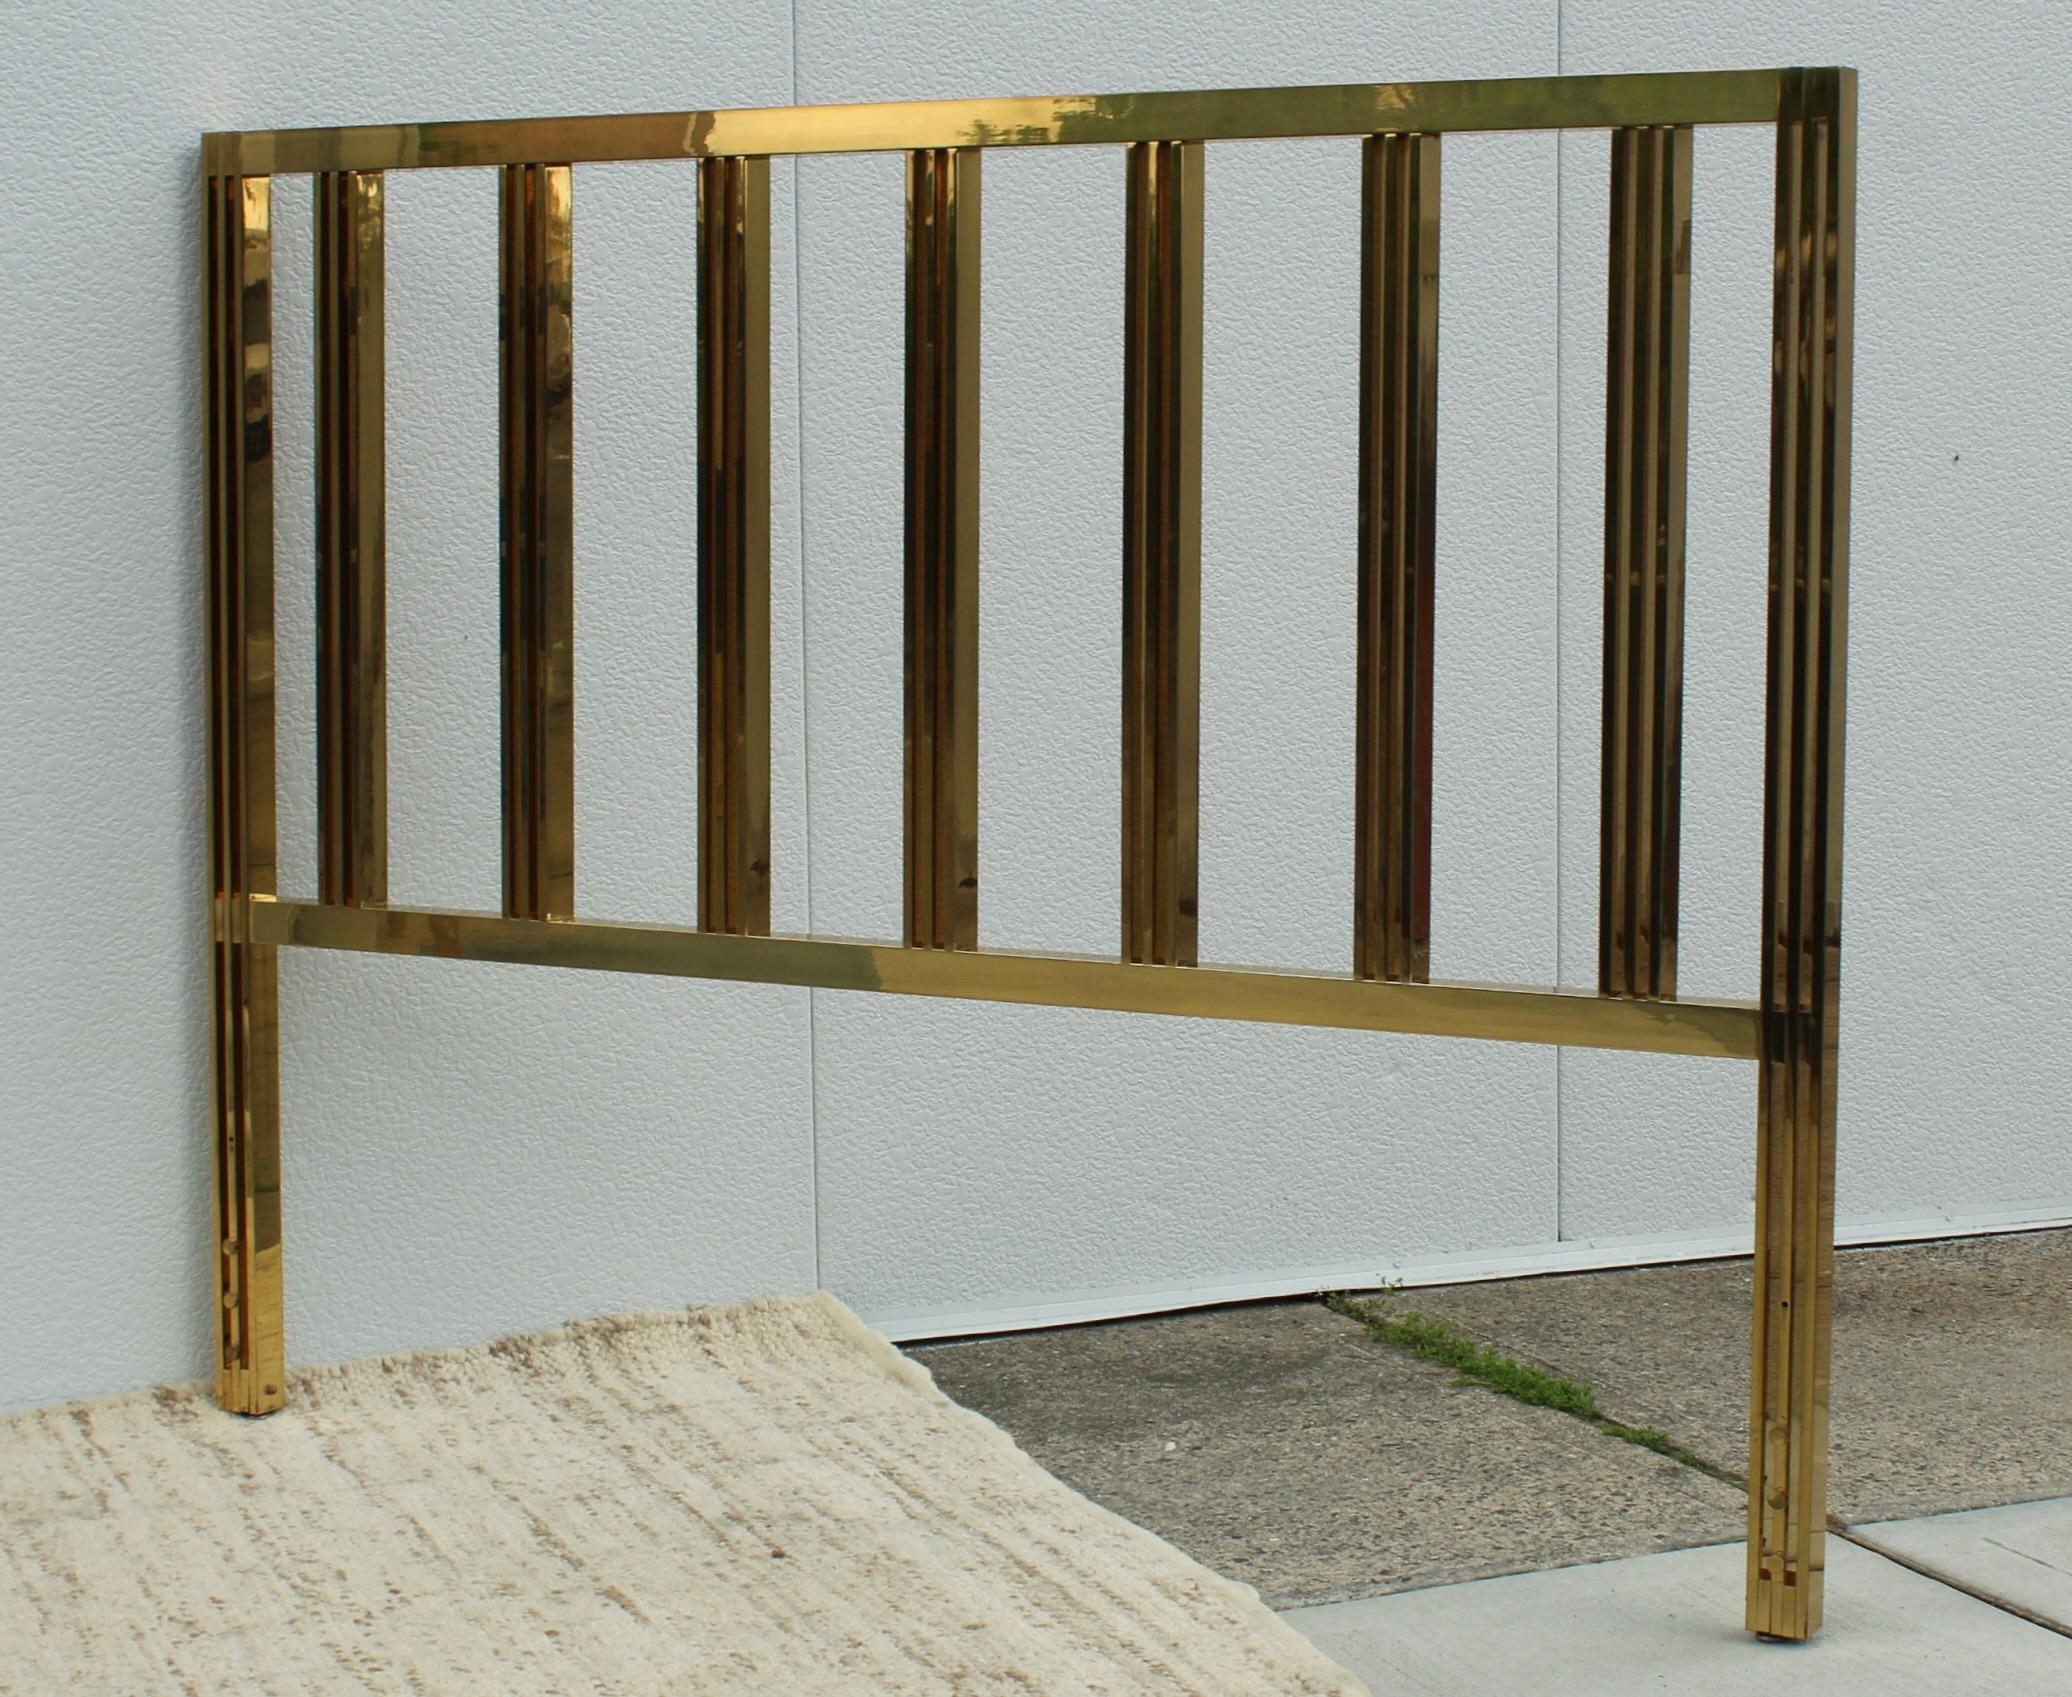 Stunning 1970's mid-century modern solid brass king size bed, in vintage original condition with some wear and patina due to age and use.